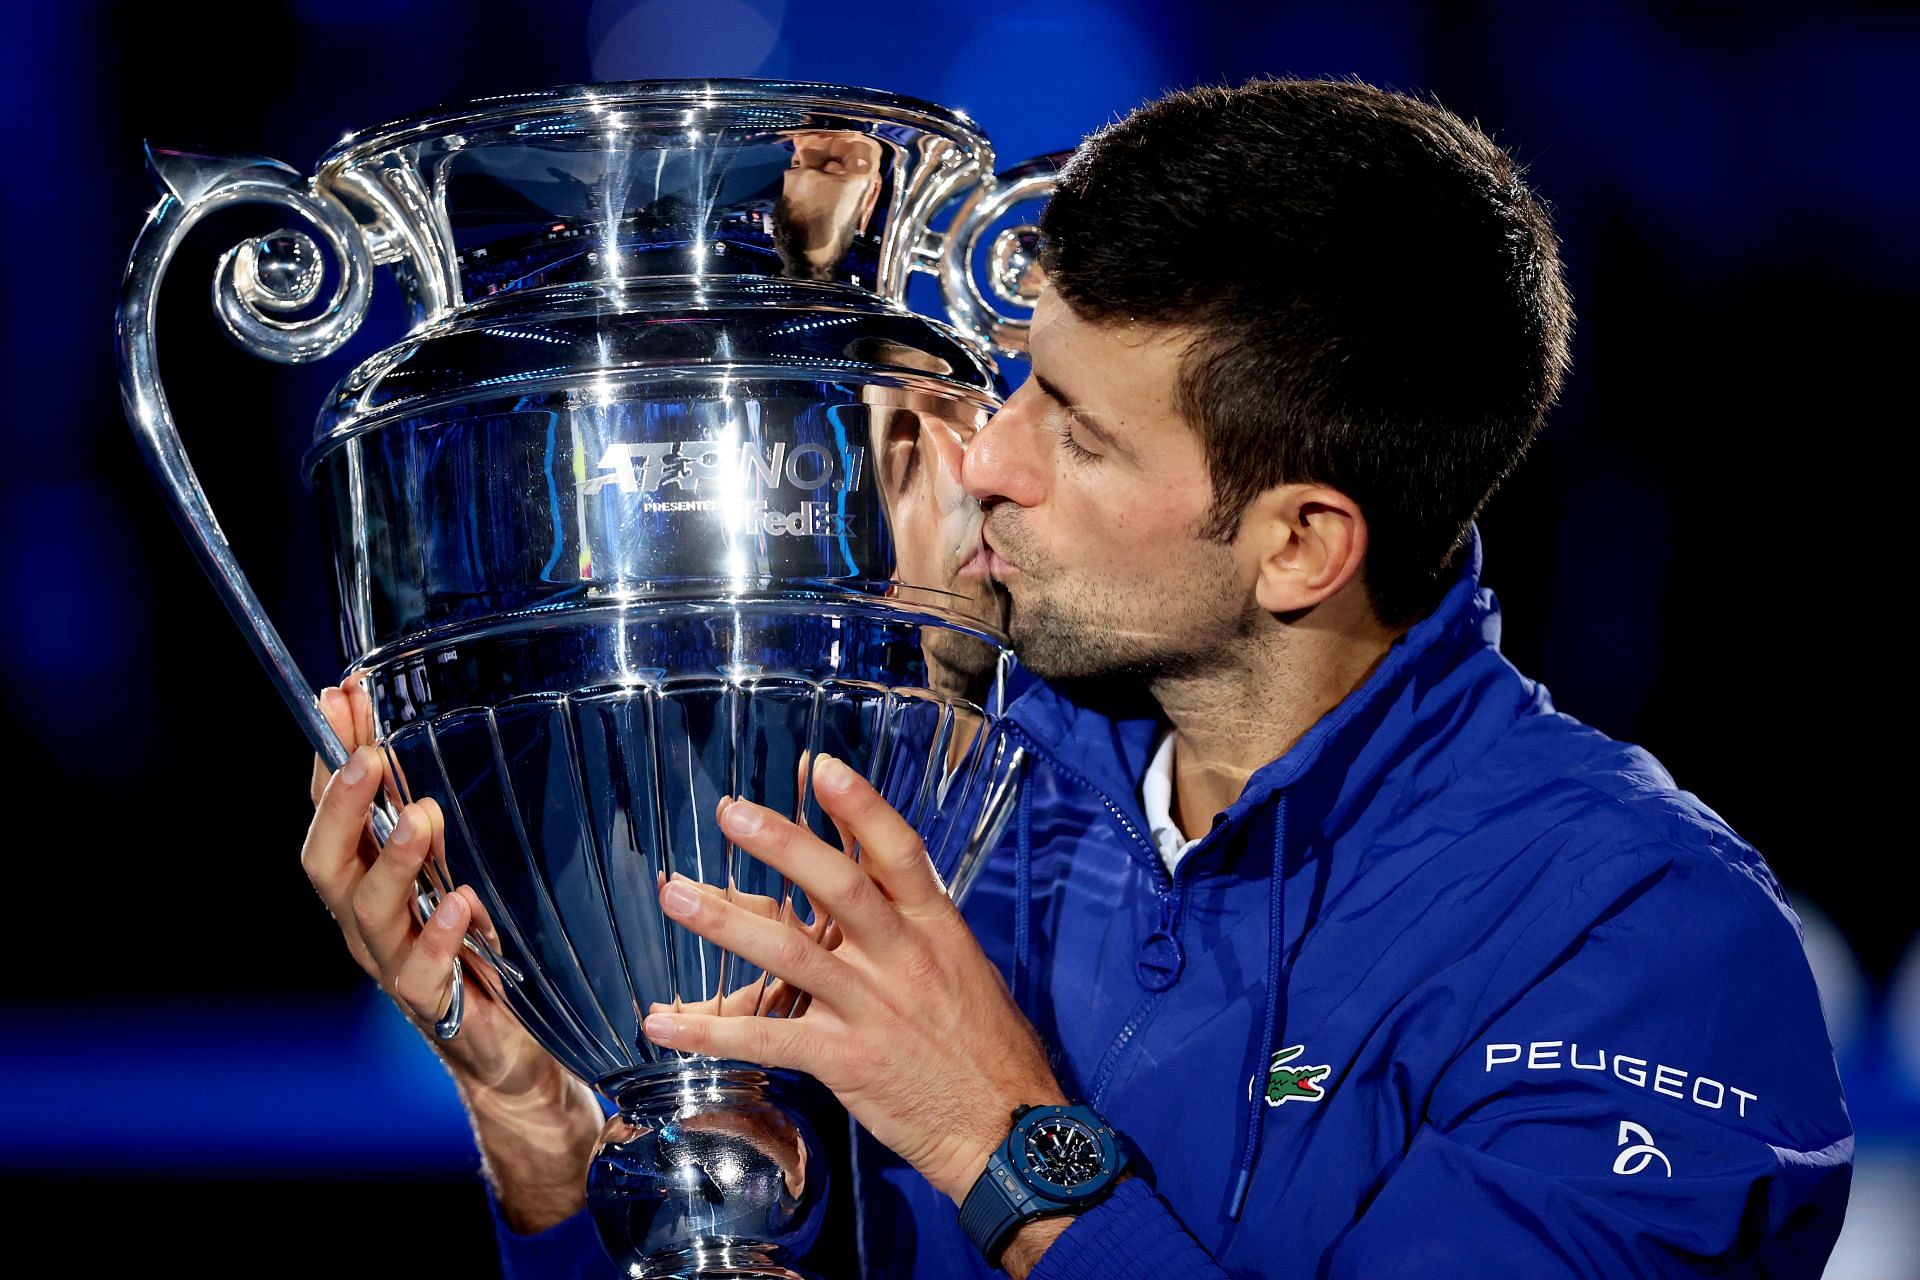 Novak Djokovic with his 7th Year-End No. 1 trophy